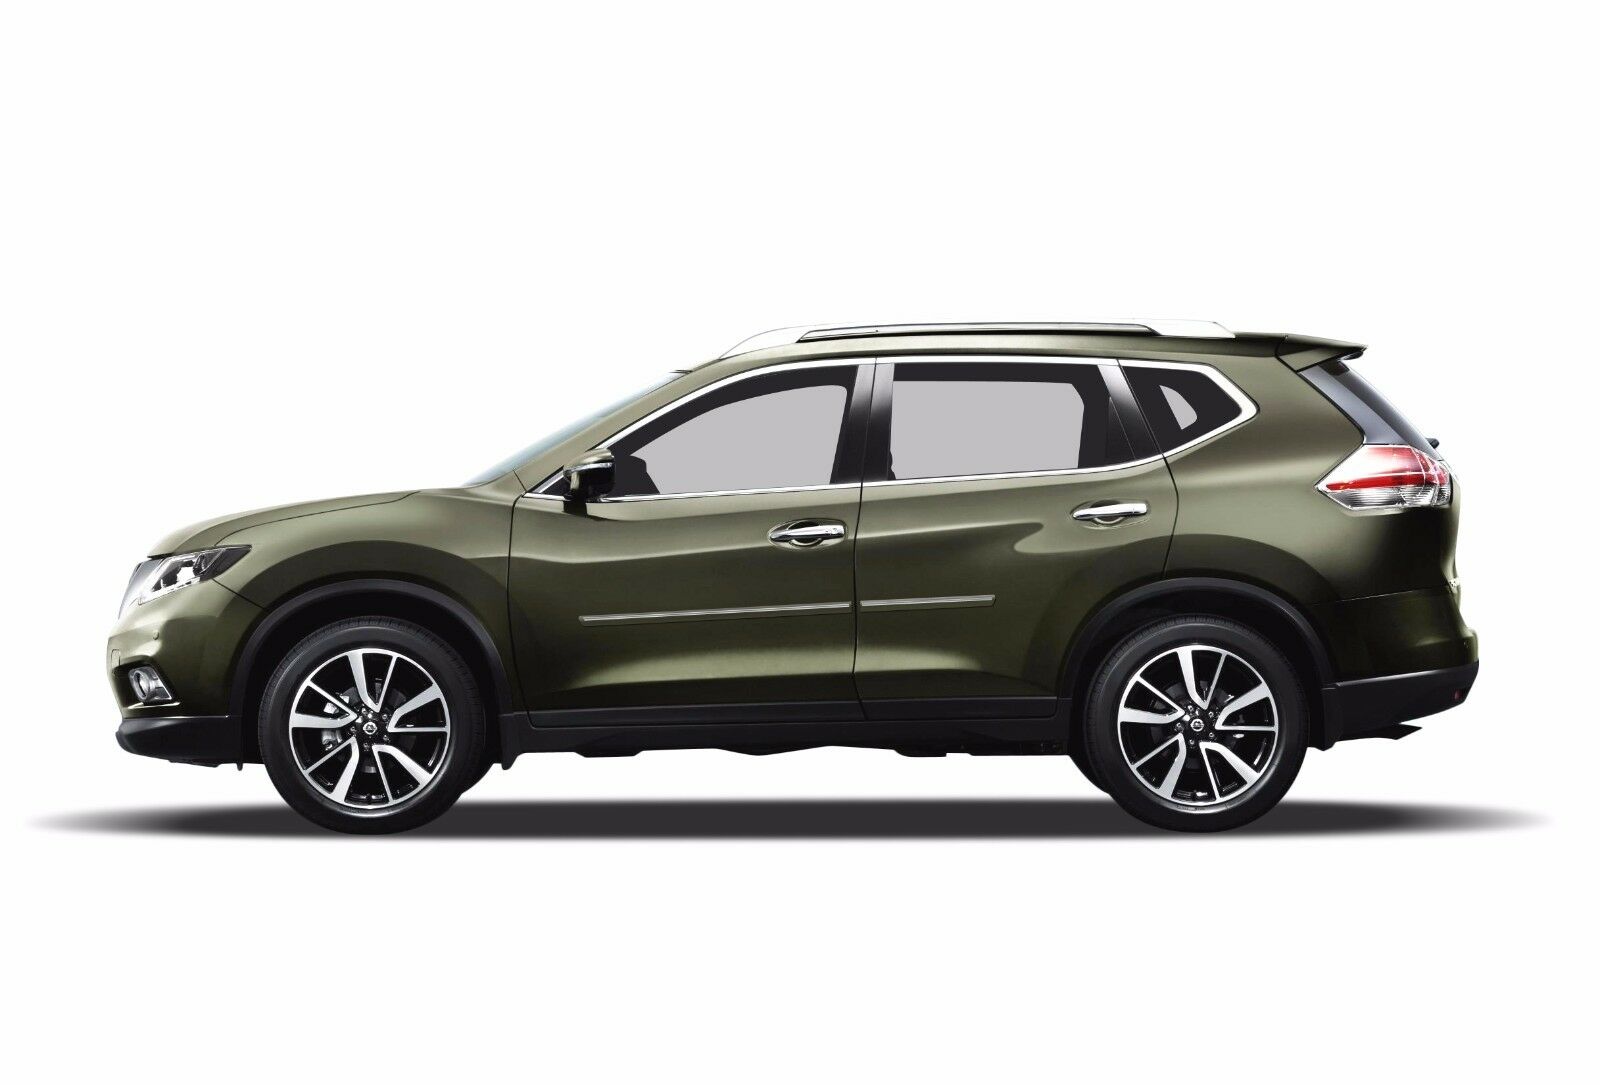 PAINTED BODY SIDE Moldings With CHROME TRIM Insert For: NISSAN ROGUE 2014-2020